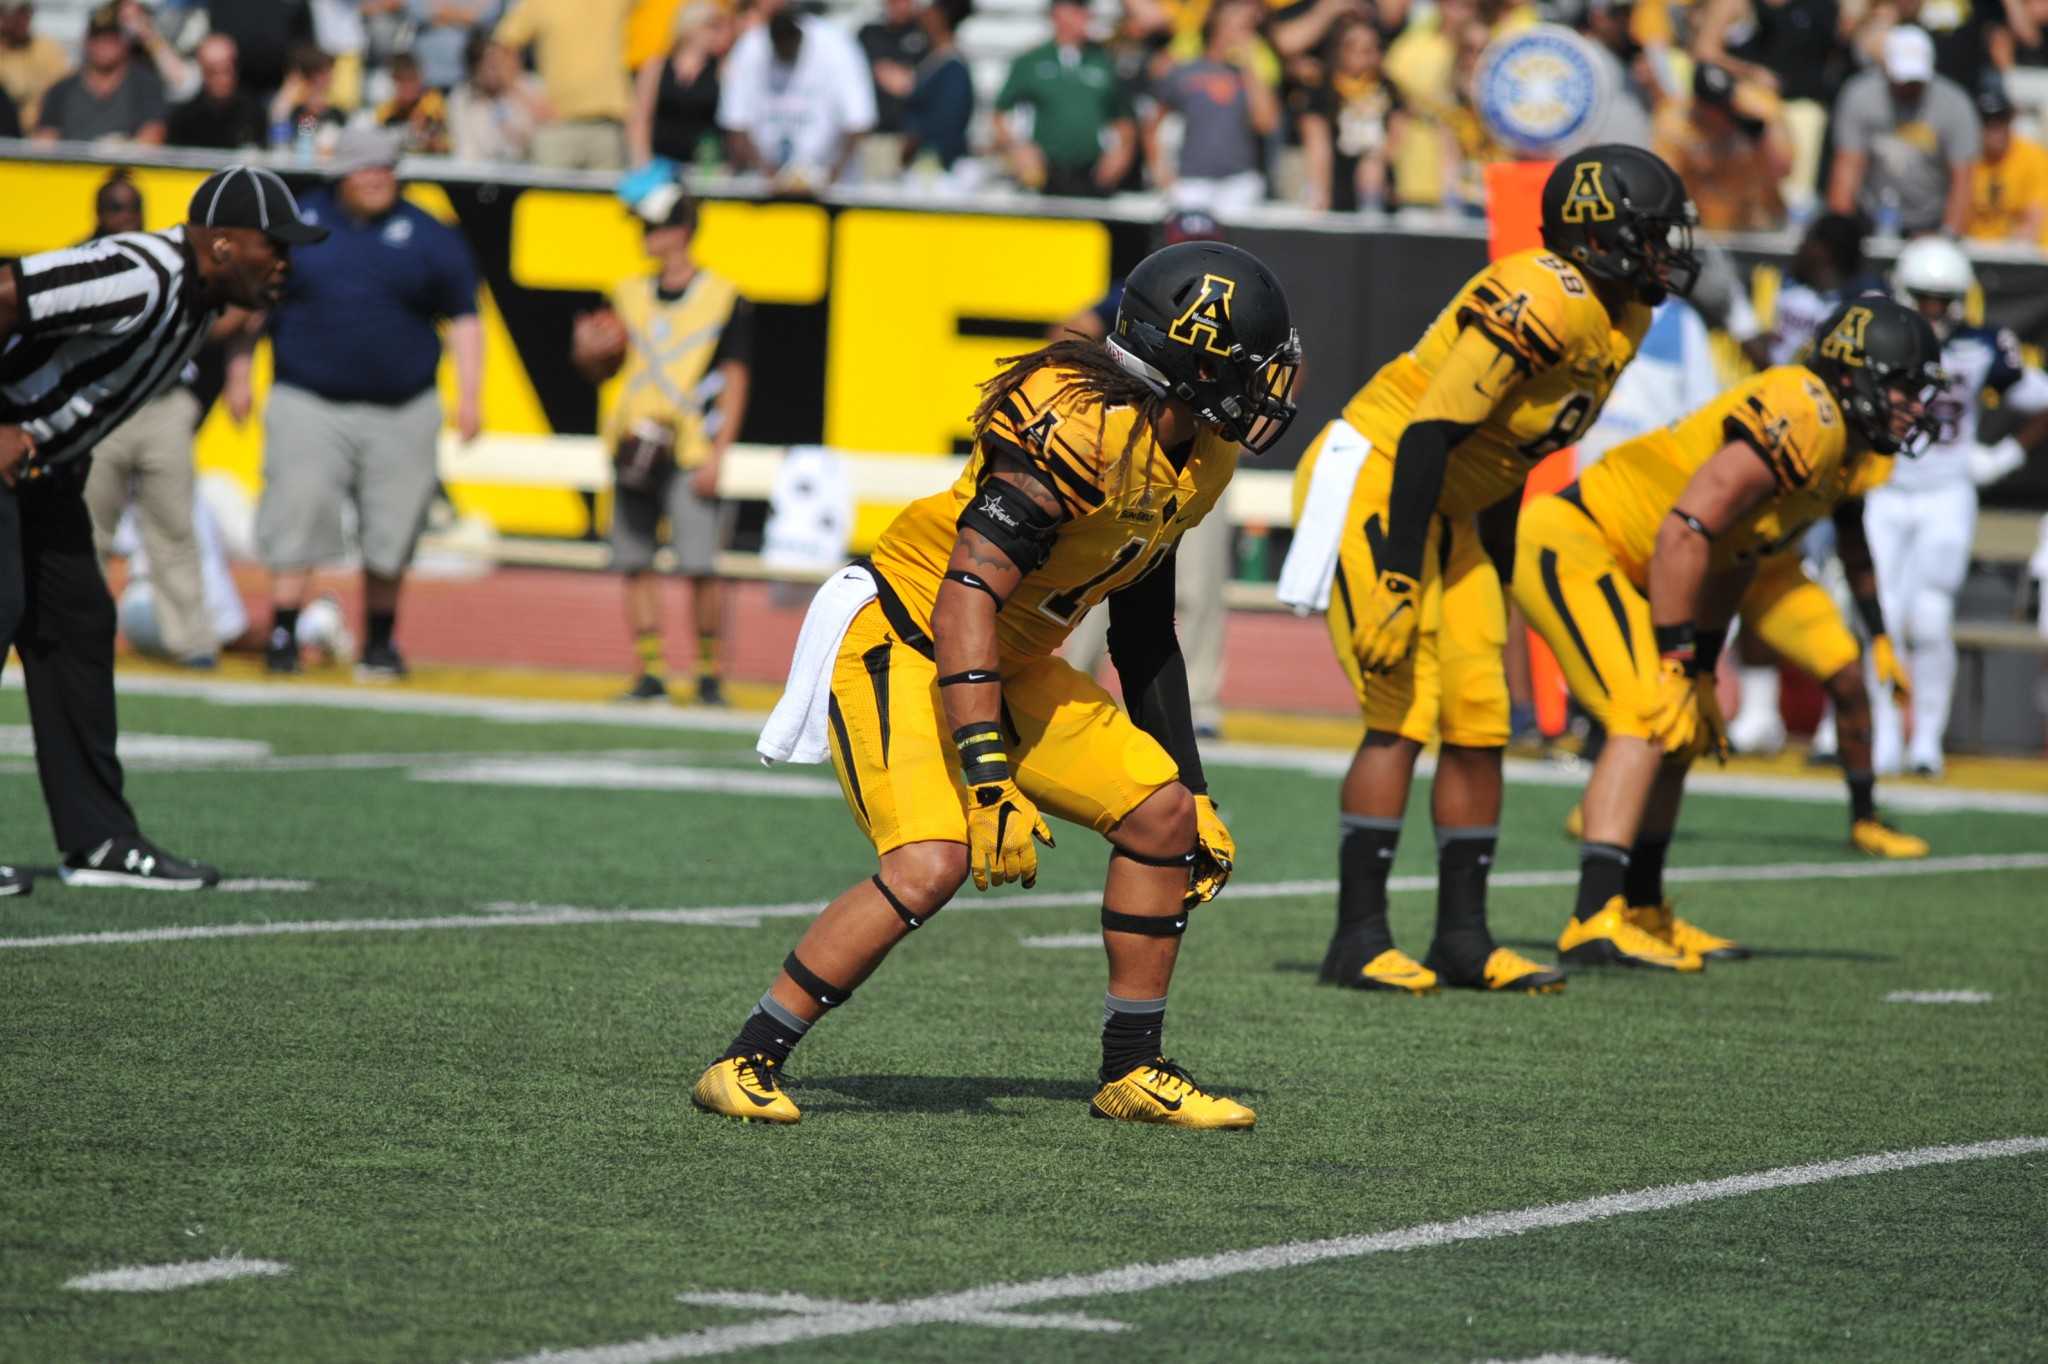 Sophomore linebacker Devan Stringer awaits the snap to rush the passer in App States home opener against Howard. The Mountaineers won 49-0. 

Credit: Appalachian State athletics/Dave Mayo